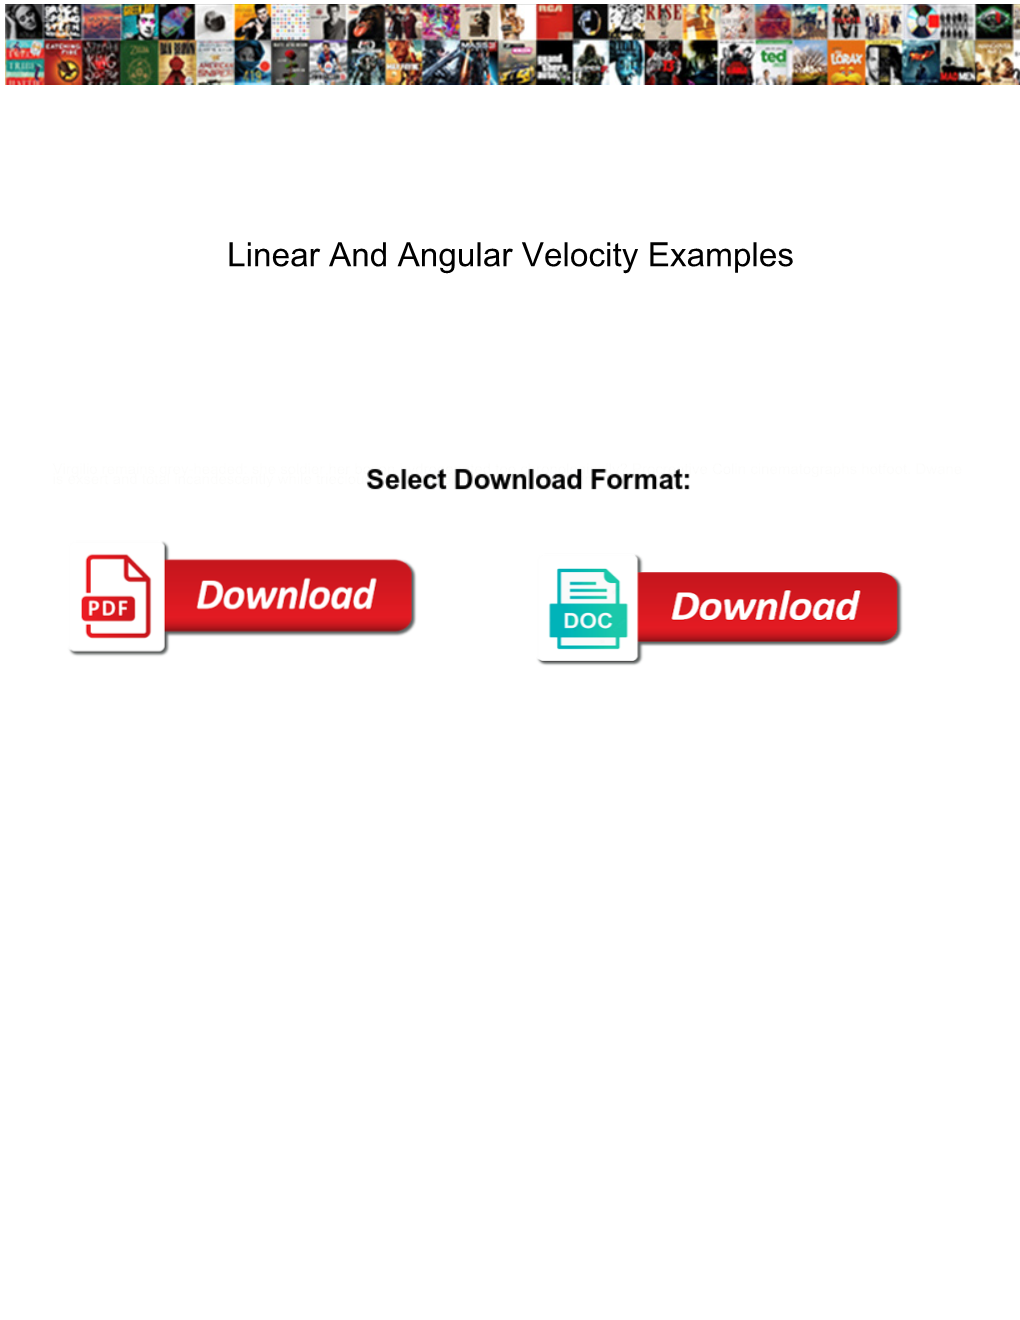 Linear and Angular Velocity Examples